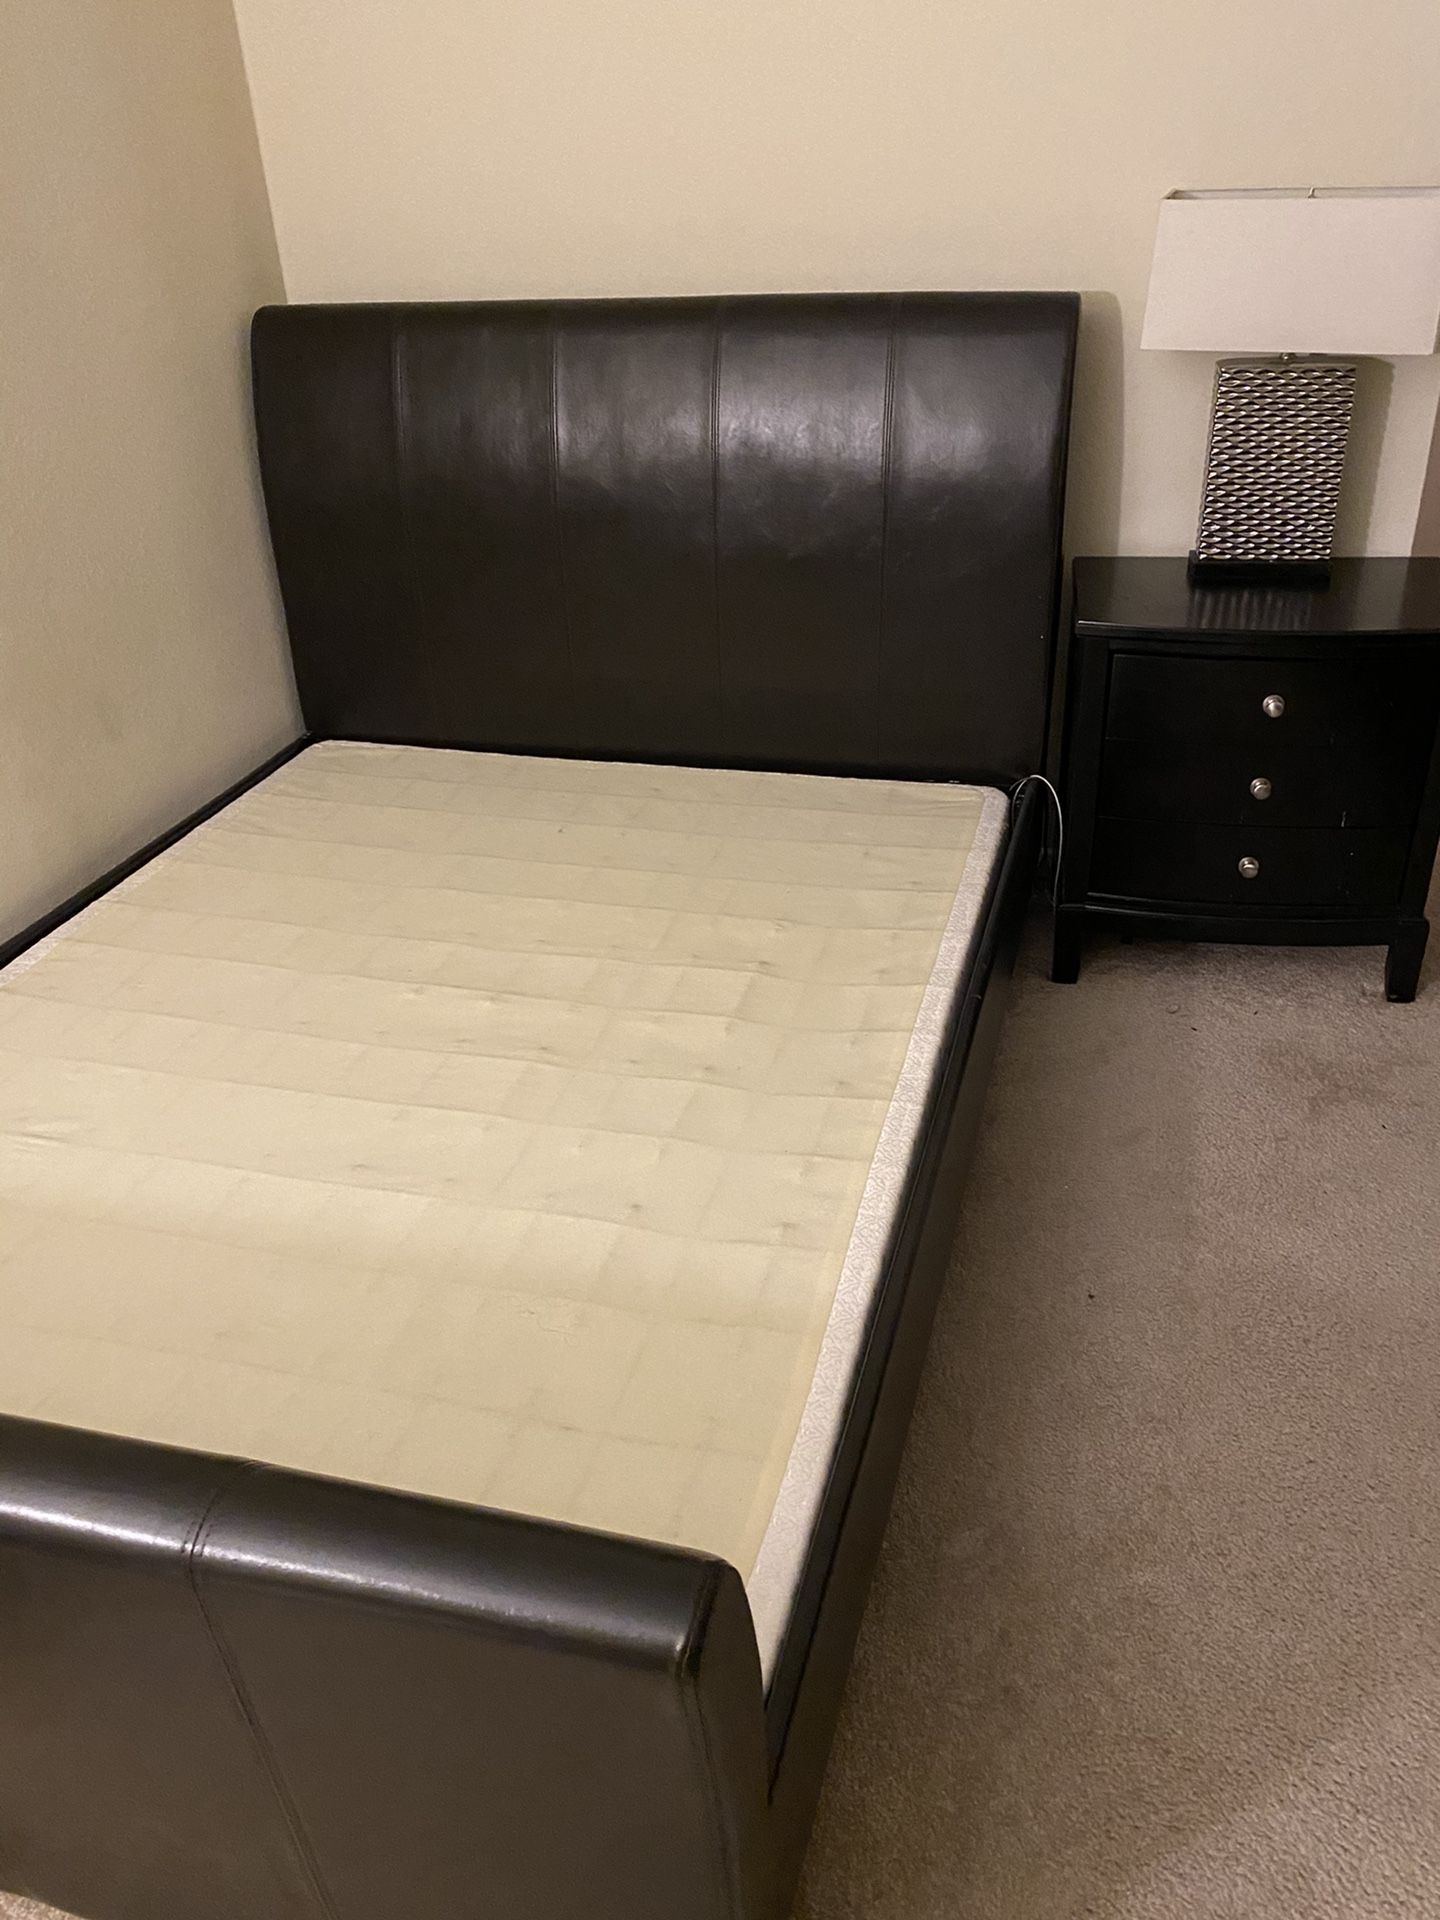 Queen size bed frame / box spring / end table & lamp/ bedroom set